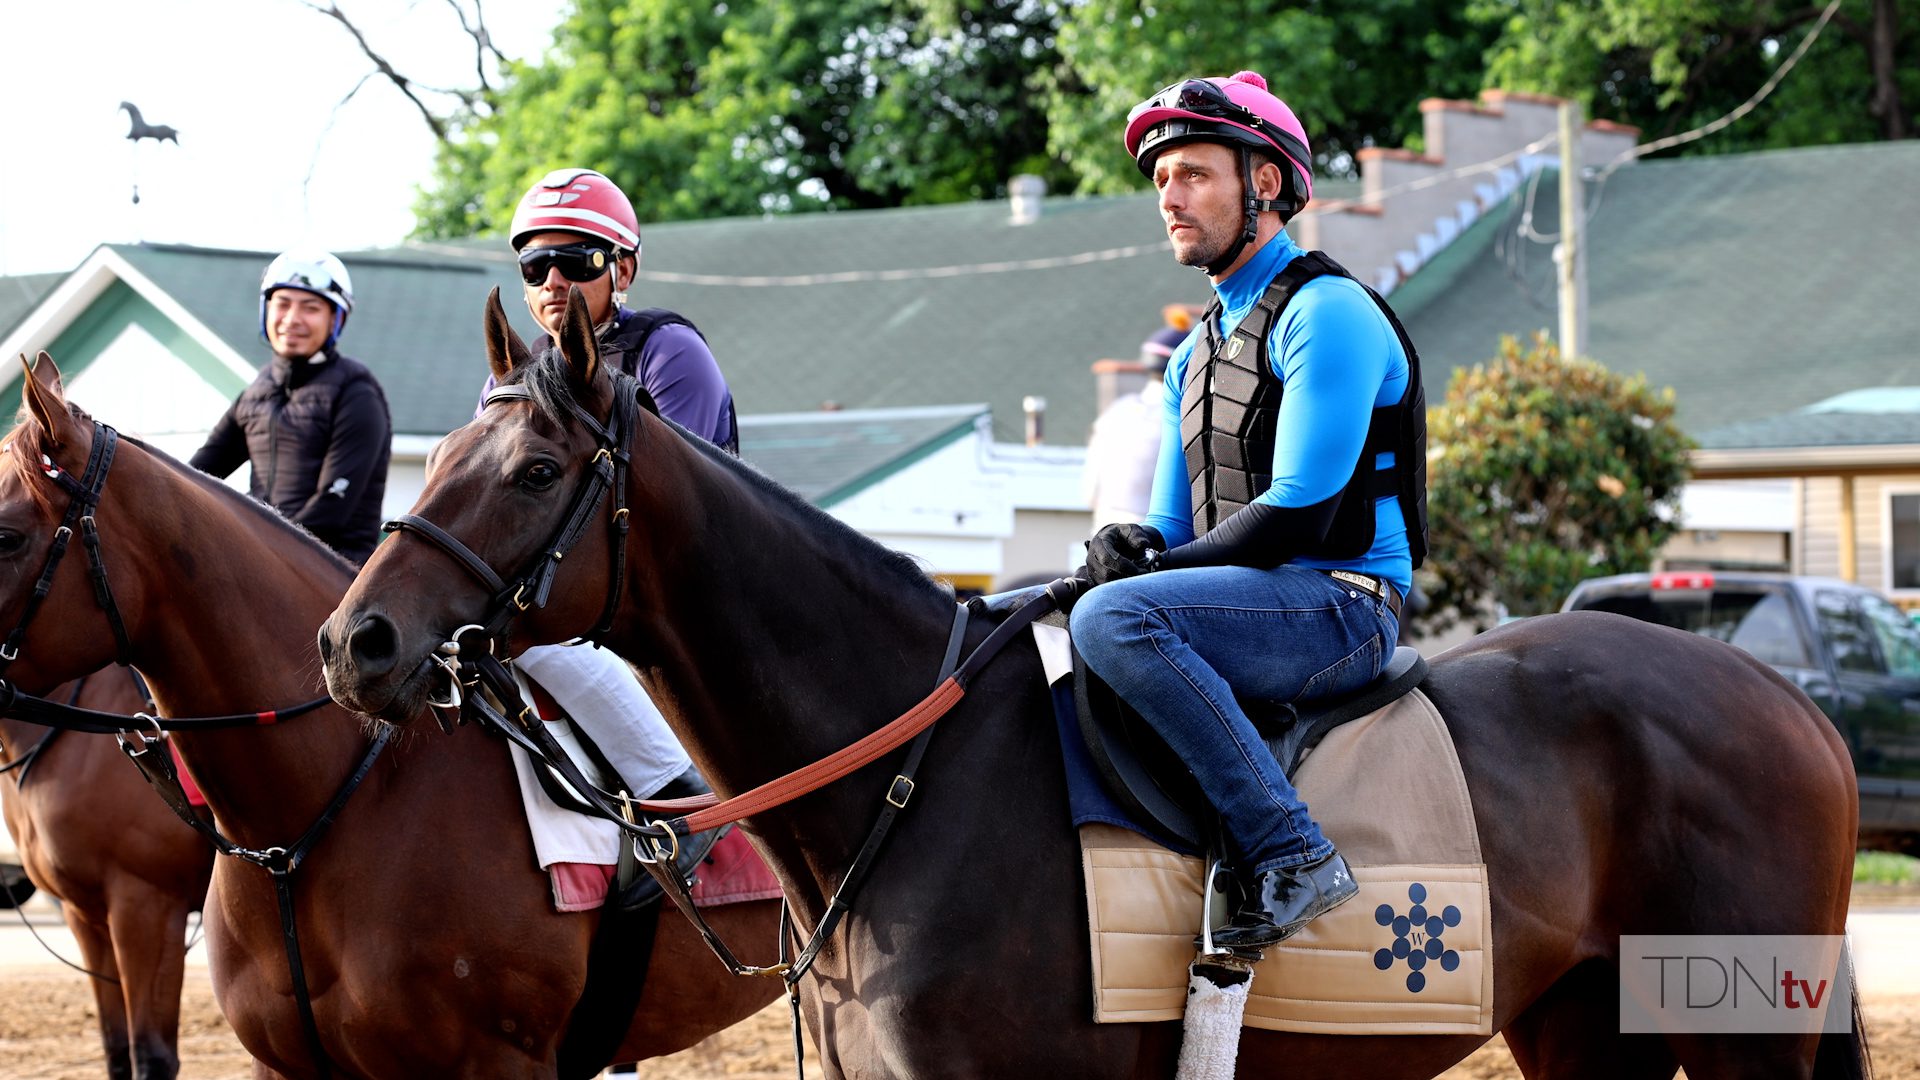 After Dramatic Derby, Can Honor Marie Step Up in Belmont?